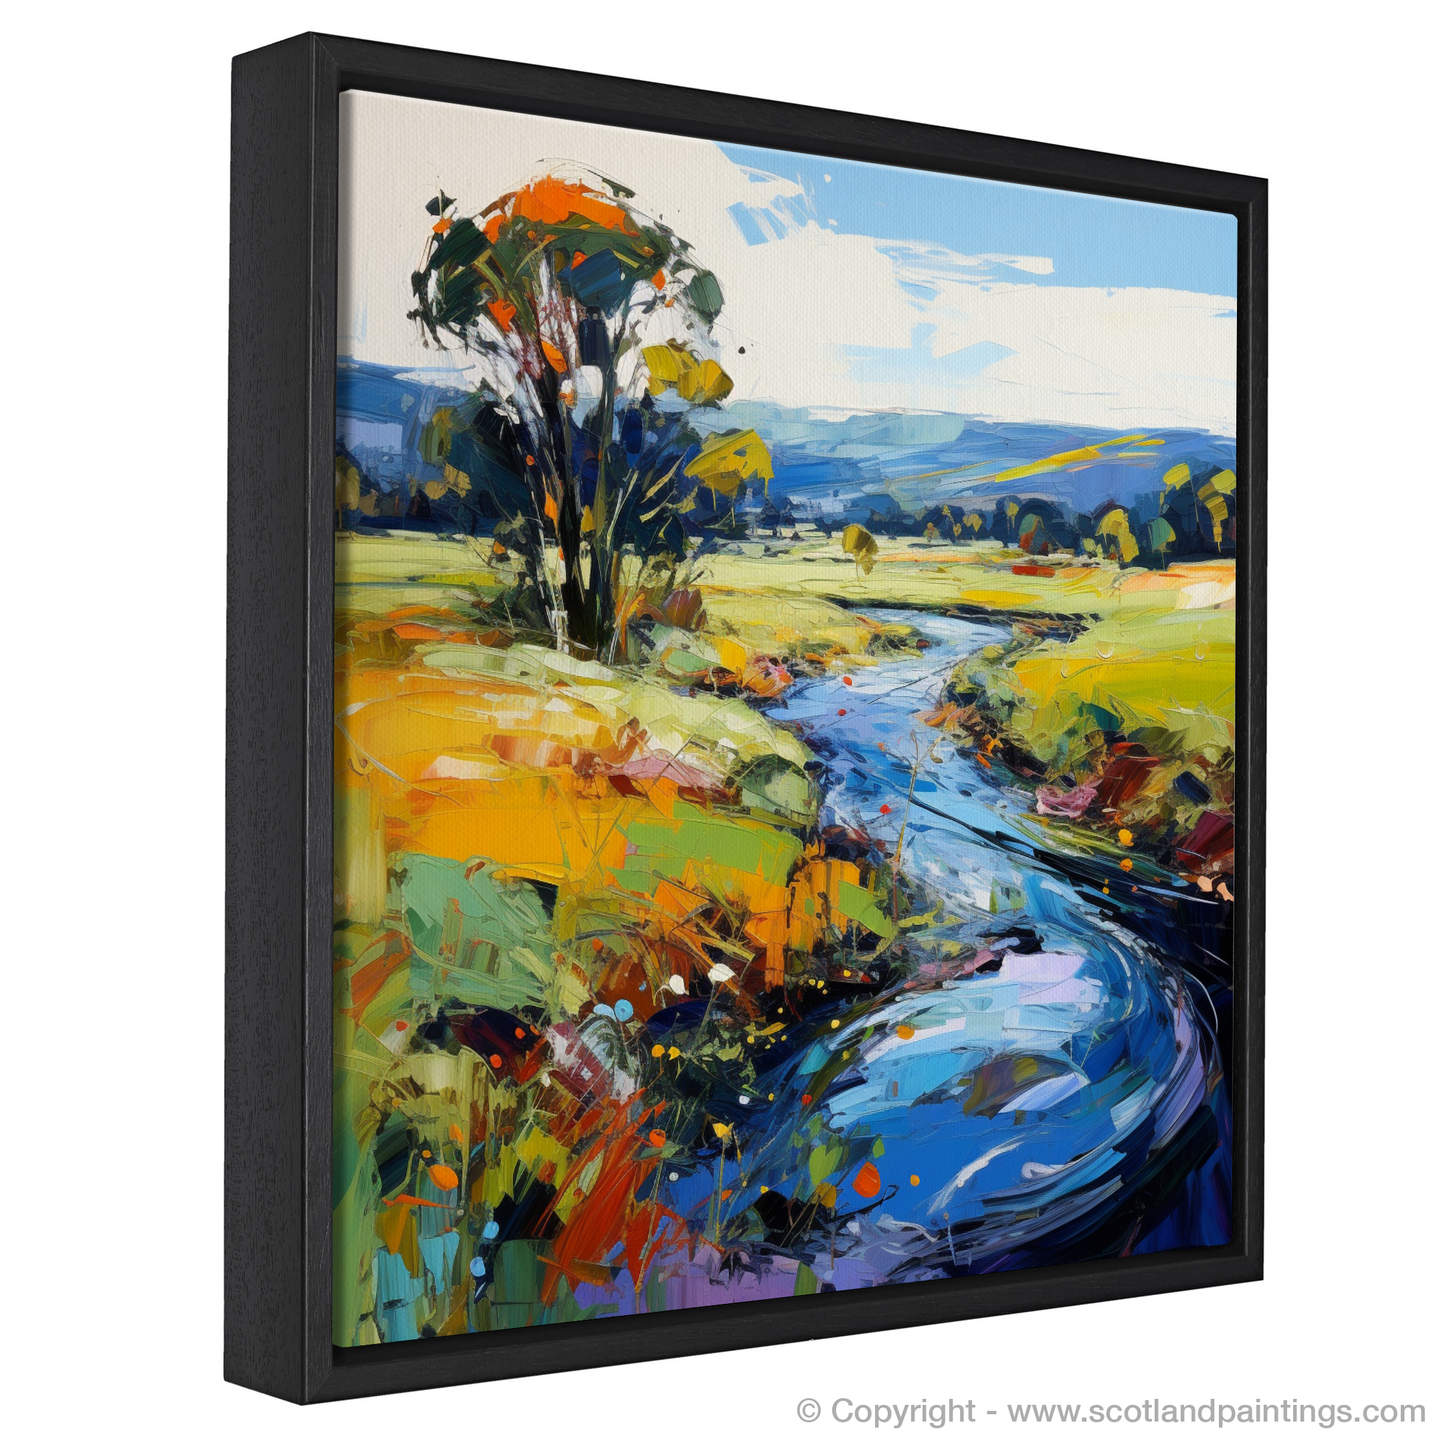 Painting and Art Print of River Don, Aberdeenshire entitled "Vivid Expressions of River Don in Autumn".